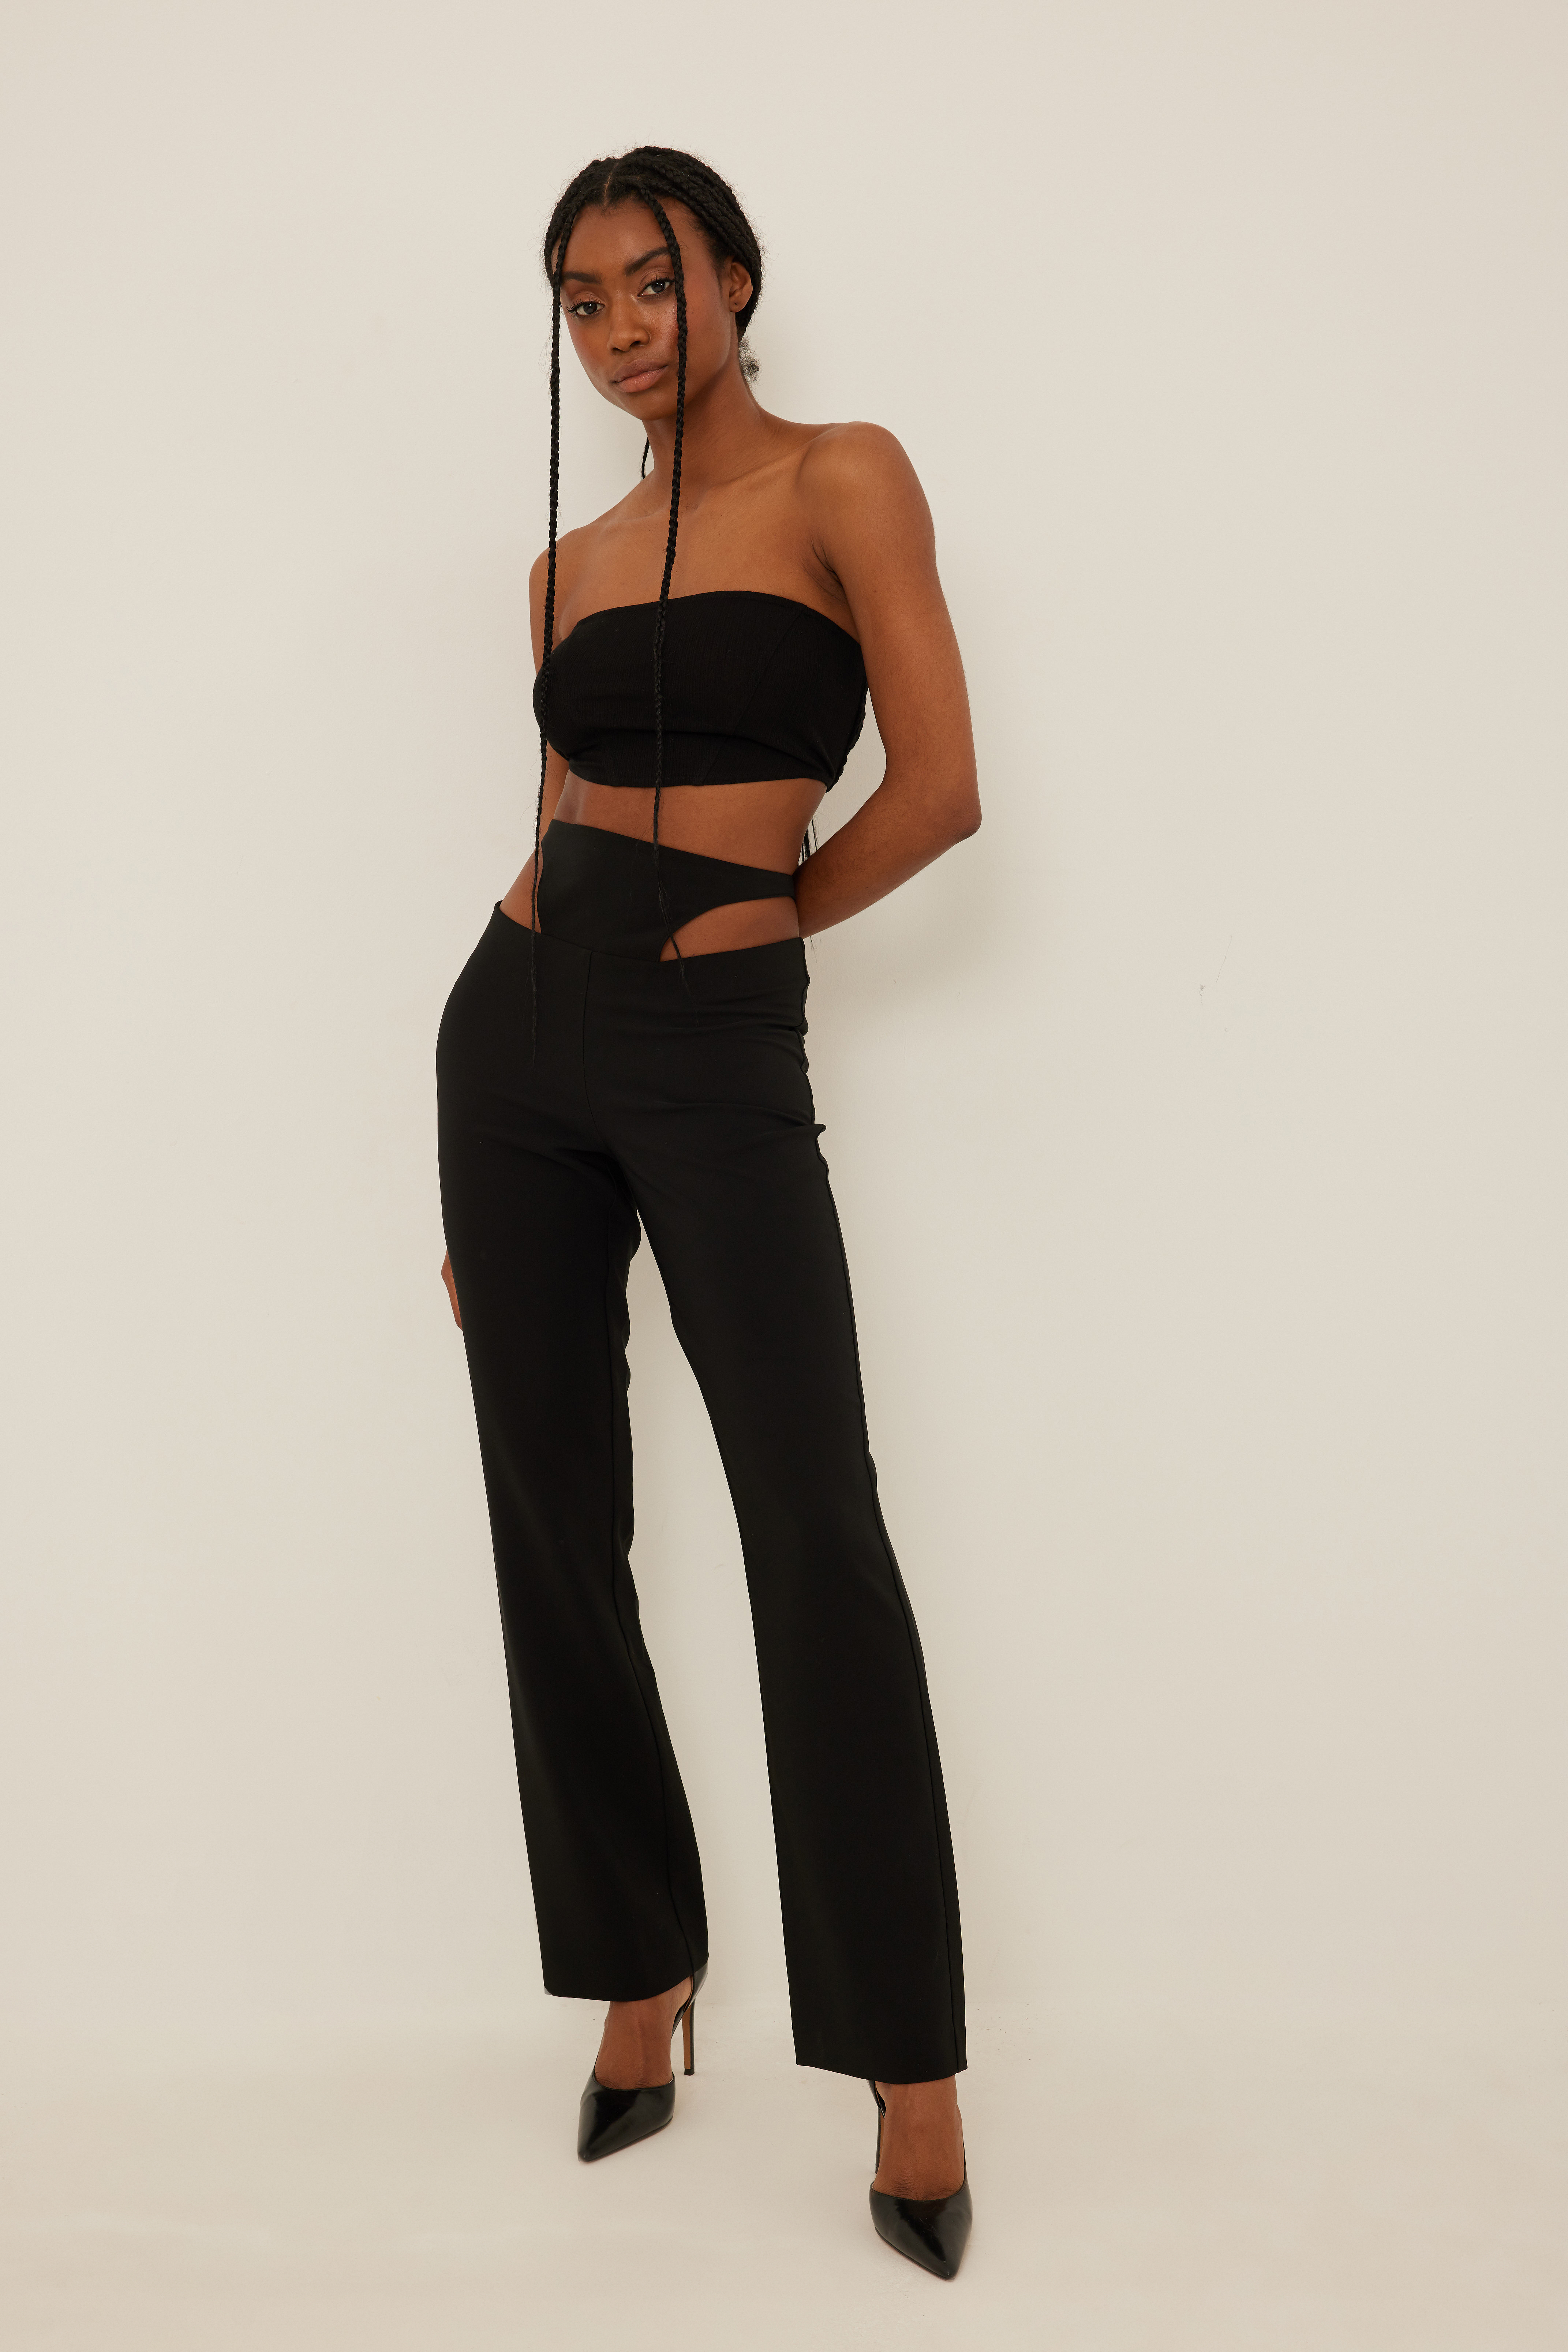 High Waist Cut Out Pants Outfit